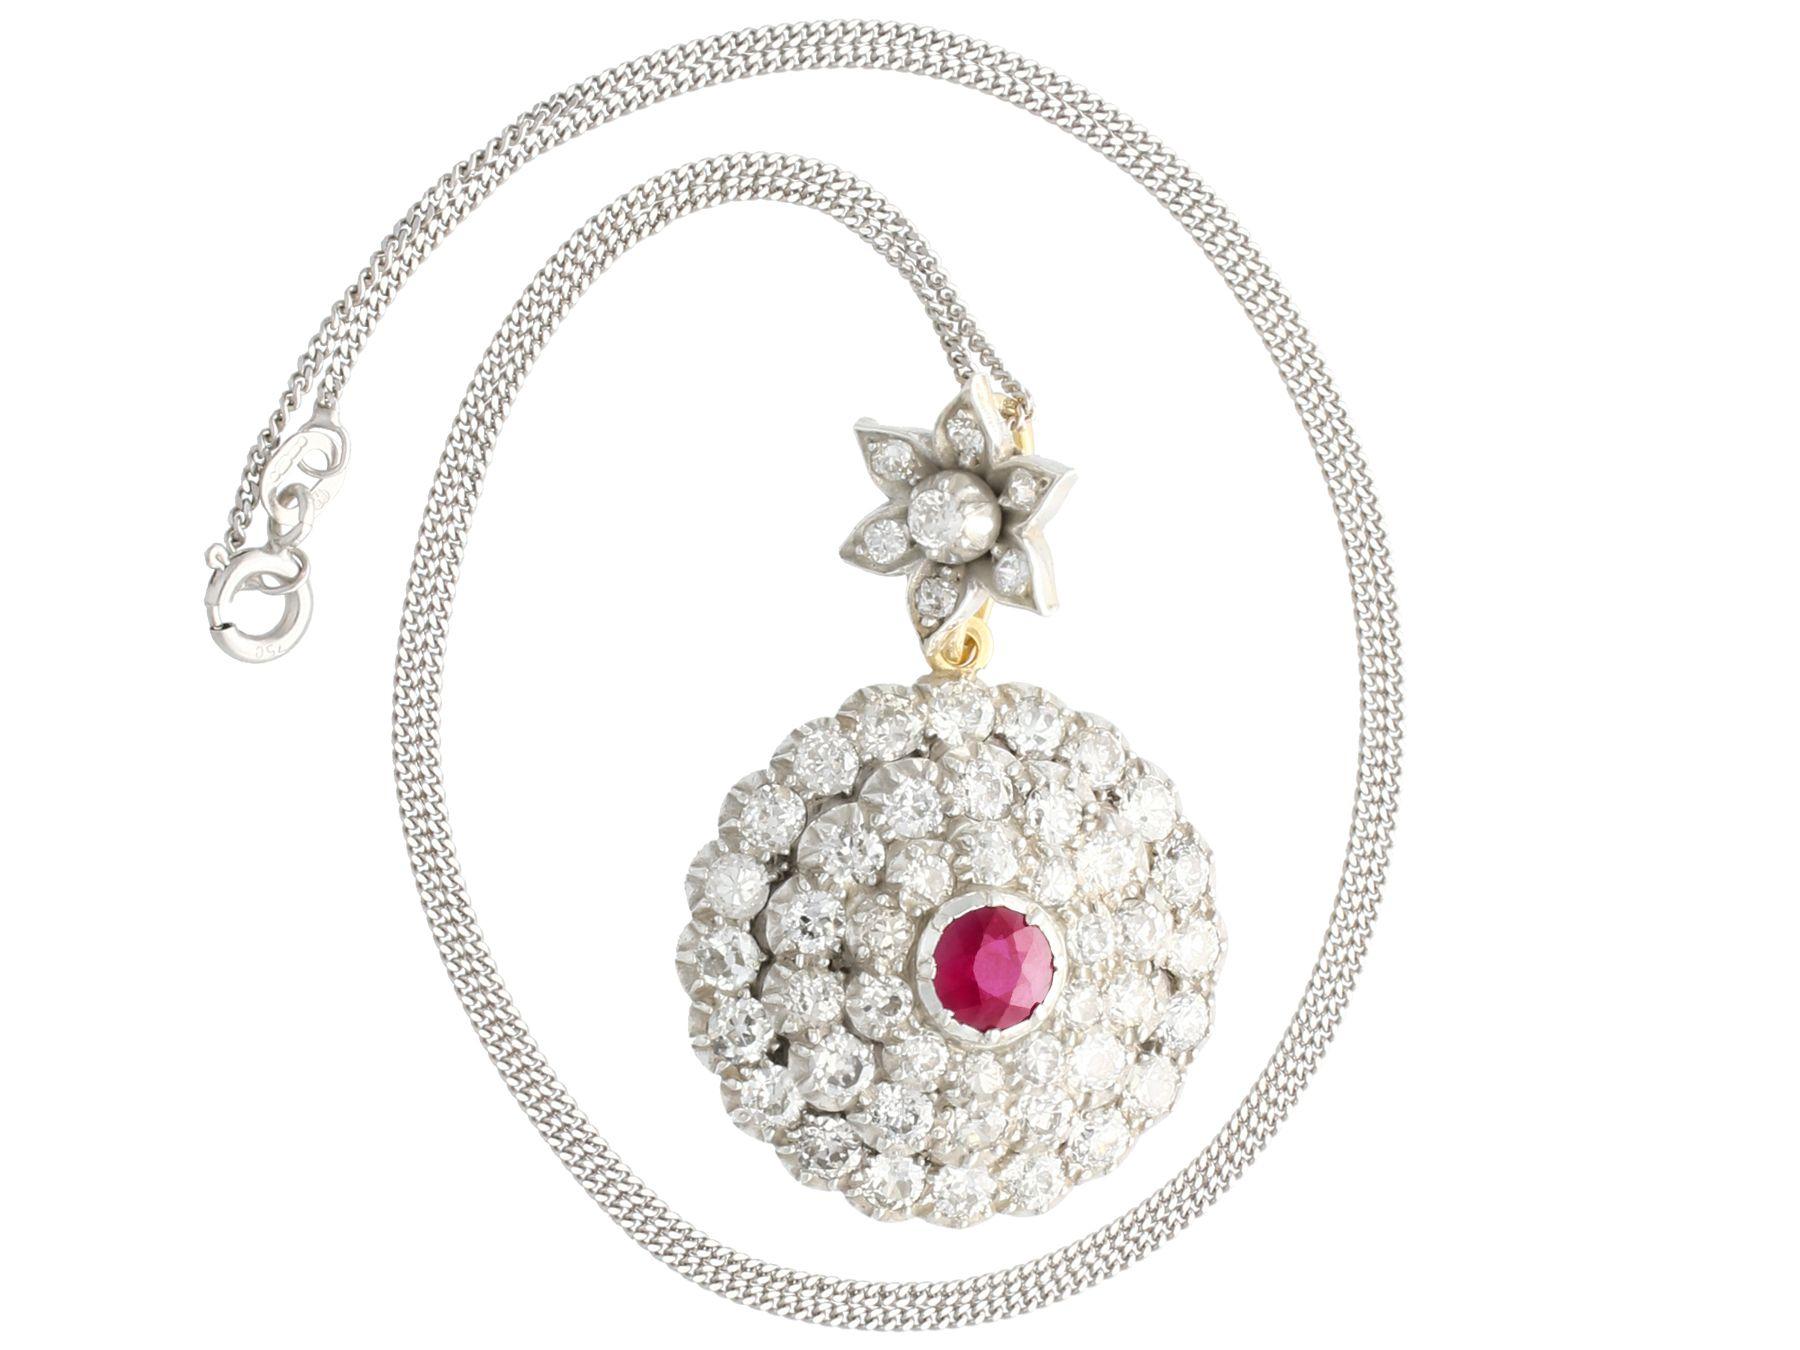 A stunning, fine and impressive antique 5.35 carat diamond and 1.04 carat ruby, 15 karat yellow gold and silver set pendant ; part of our diverse antique jewelry collections.

This stunning, fine and impressive Victorian ruby pendant with diamonds